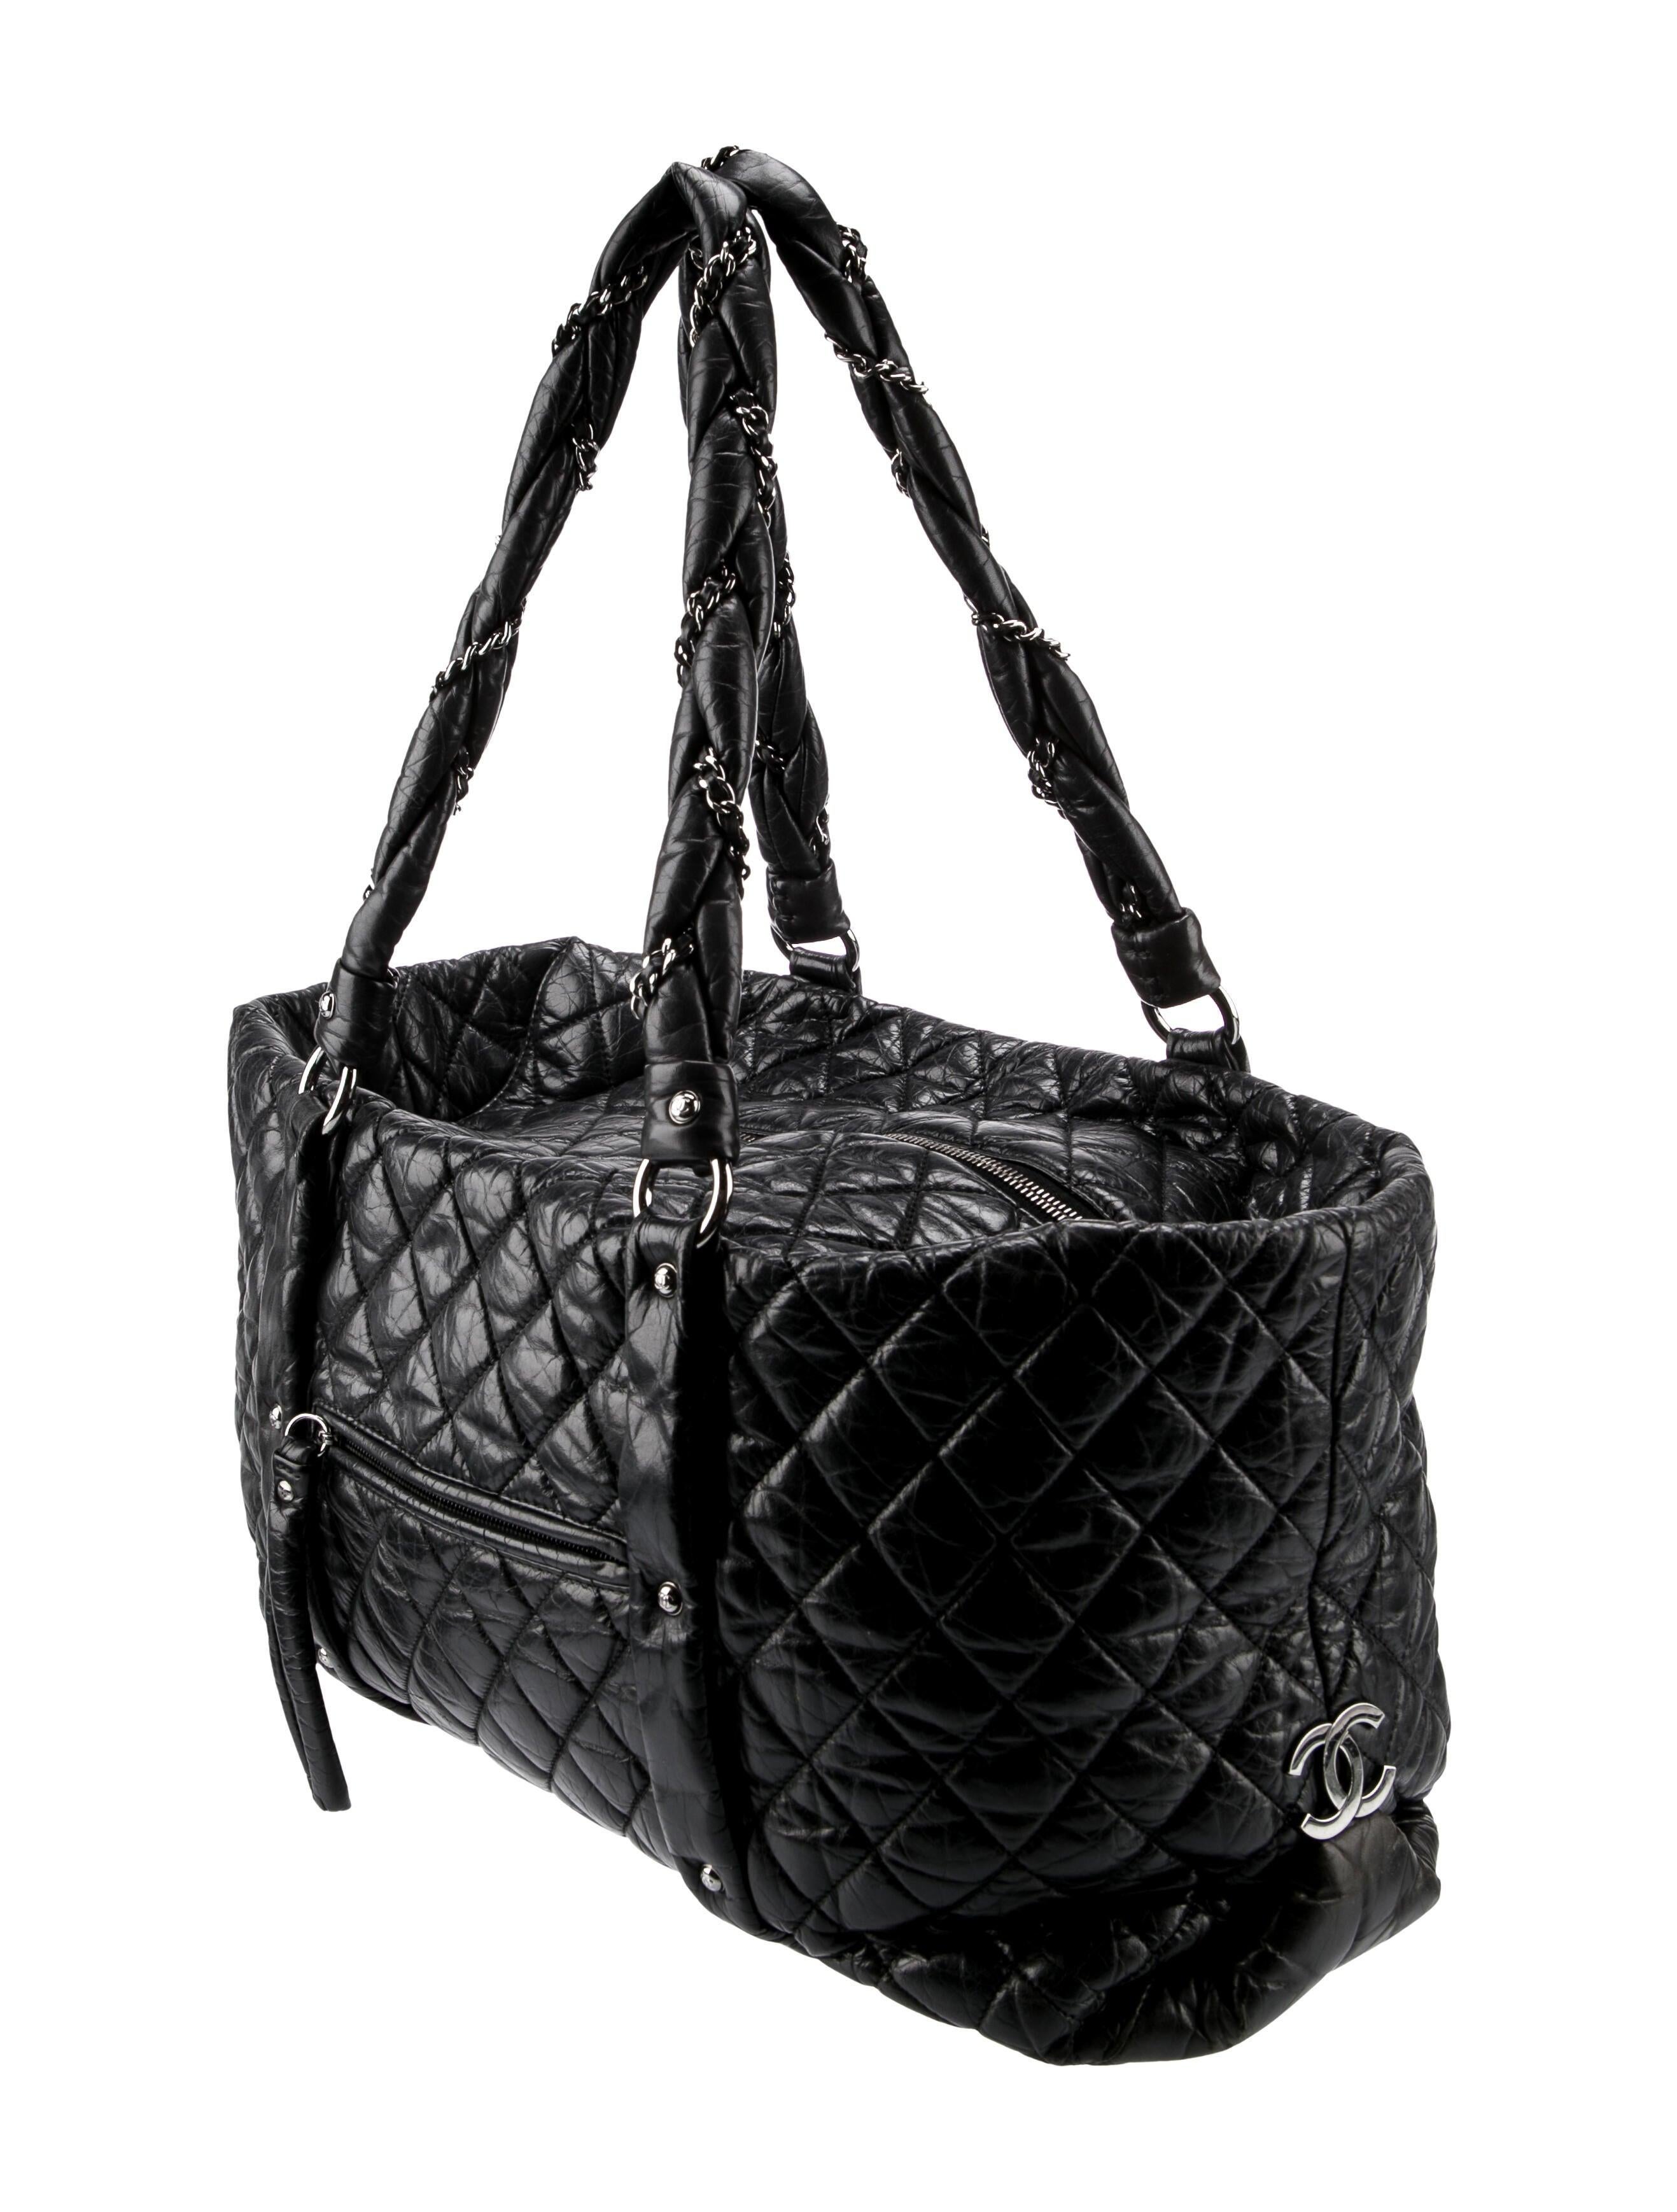 Chanel 2006 Soft Plush Quilted Distressed Leather Large Carry-On Travel Tote Bag For Sale 8